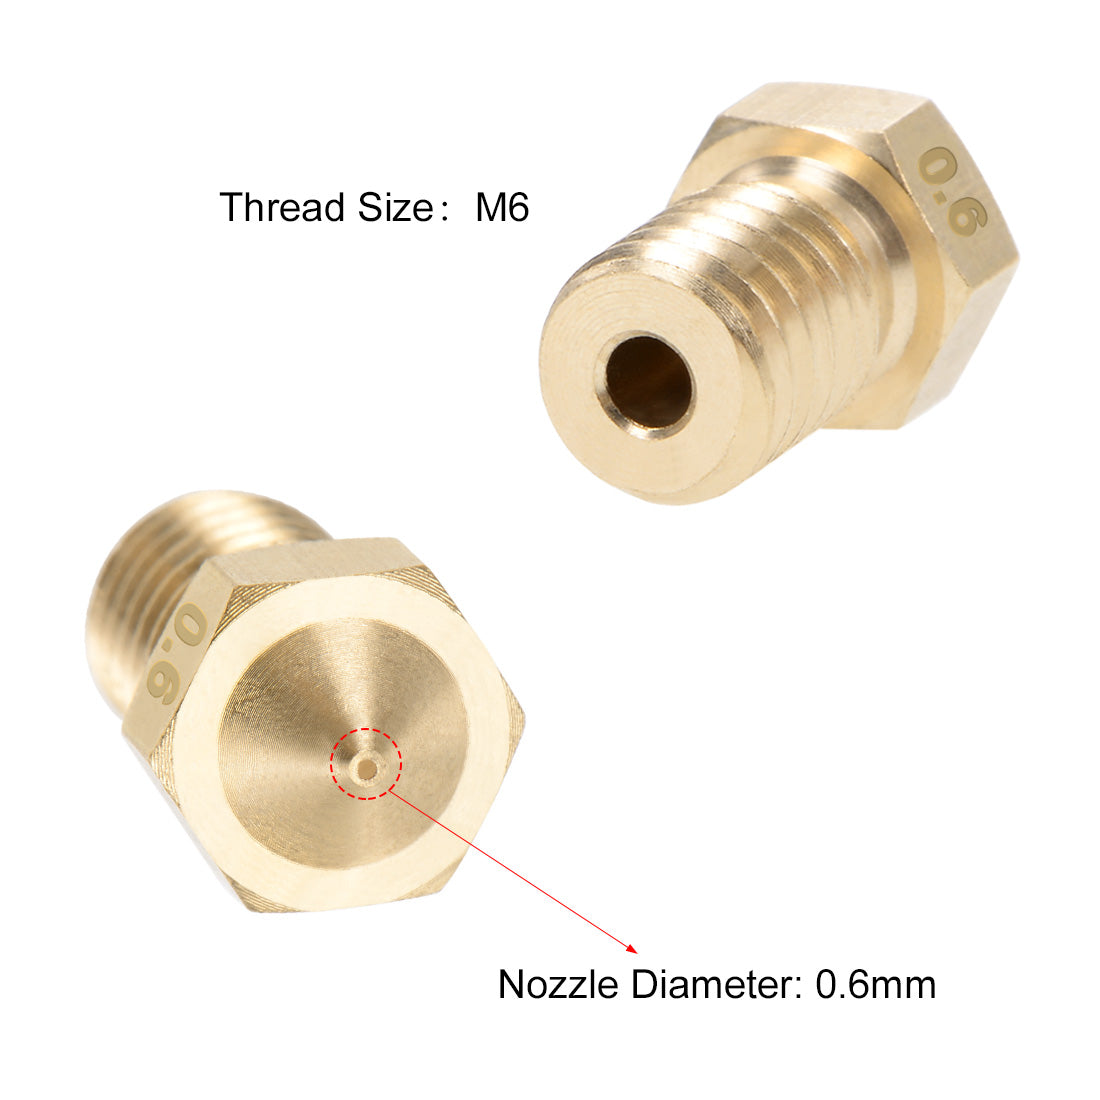 uxcell Uxcell 0.6mm 3D Printer Nozzle Head M6 for V5 V6 1.75mm Extruder Print, Brass 2pcs